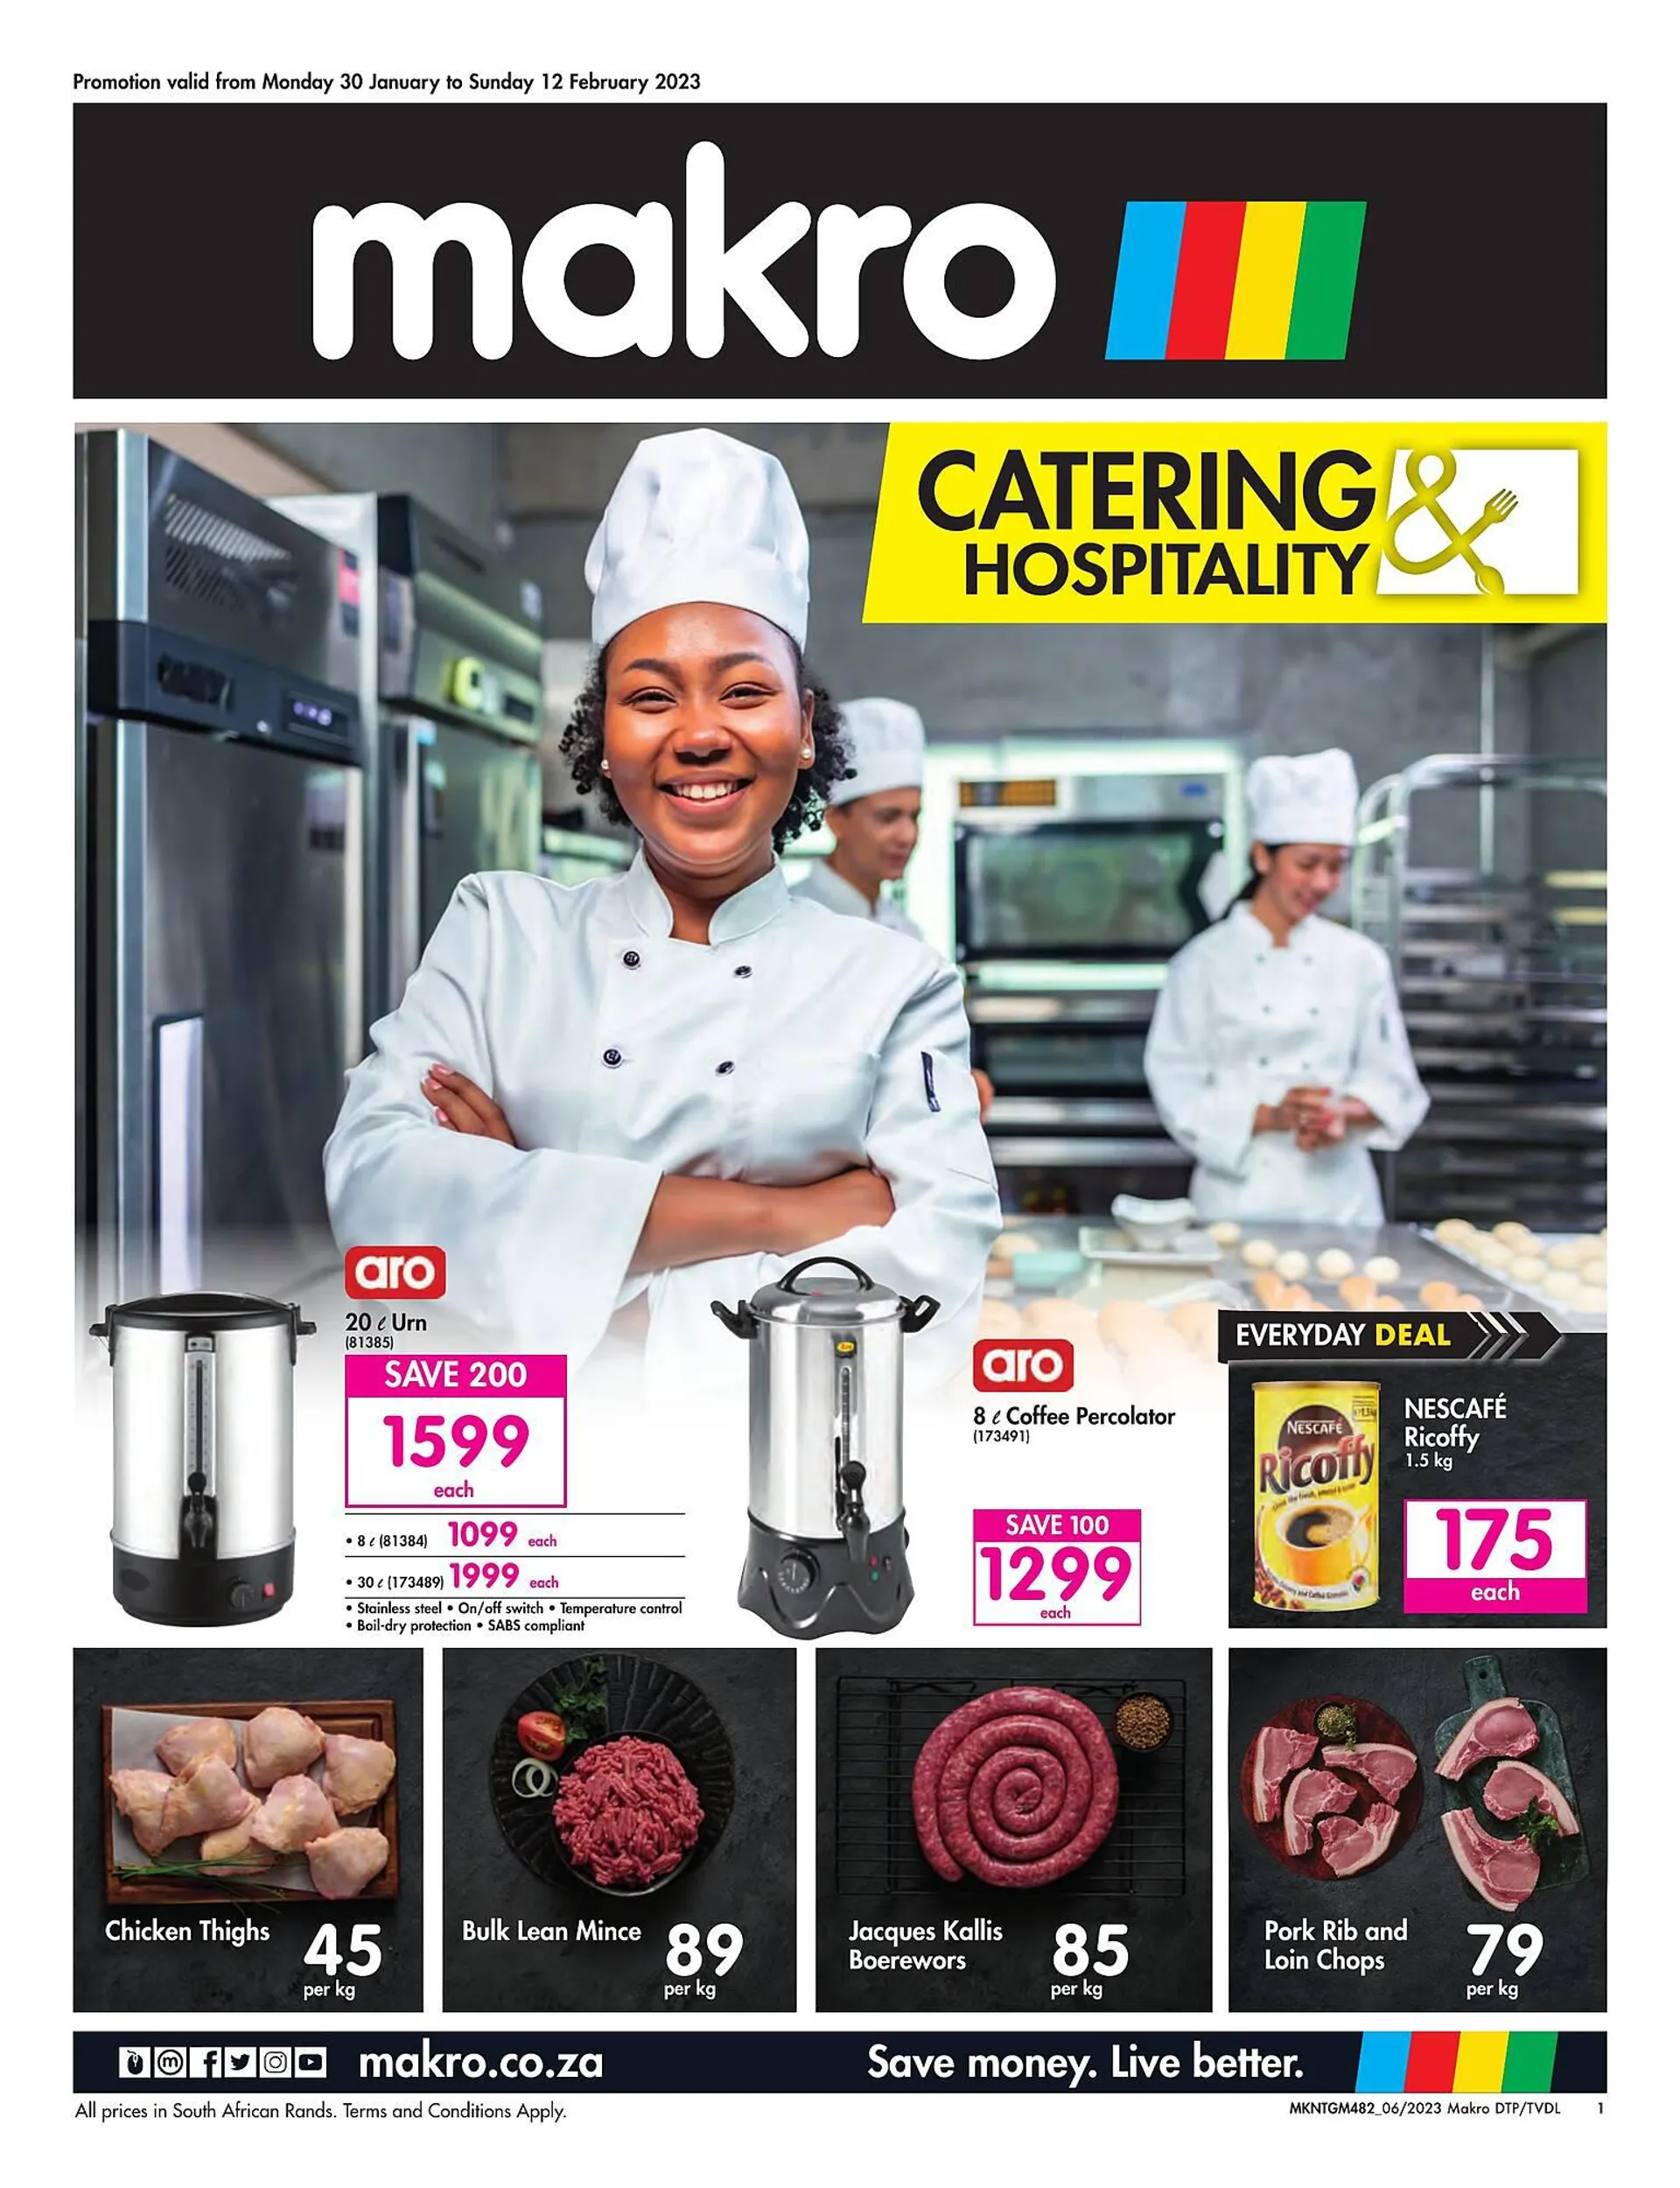 Makro catalogue - Catering - 1